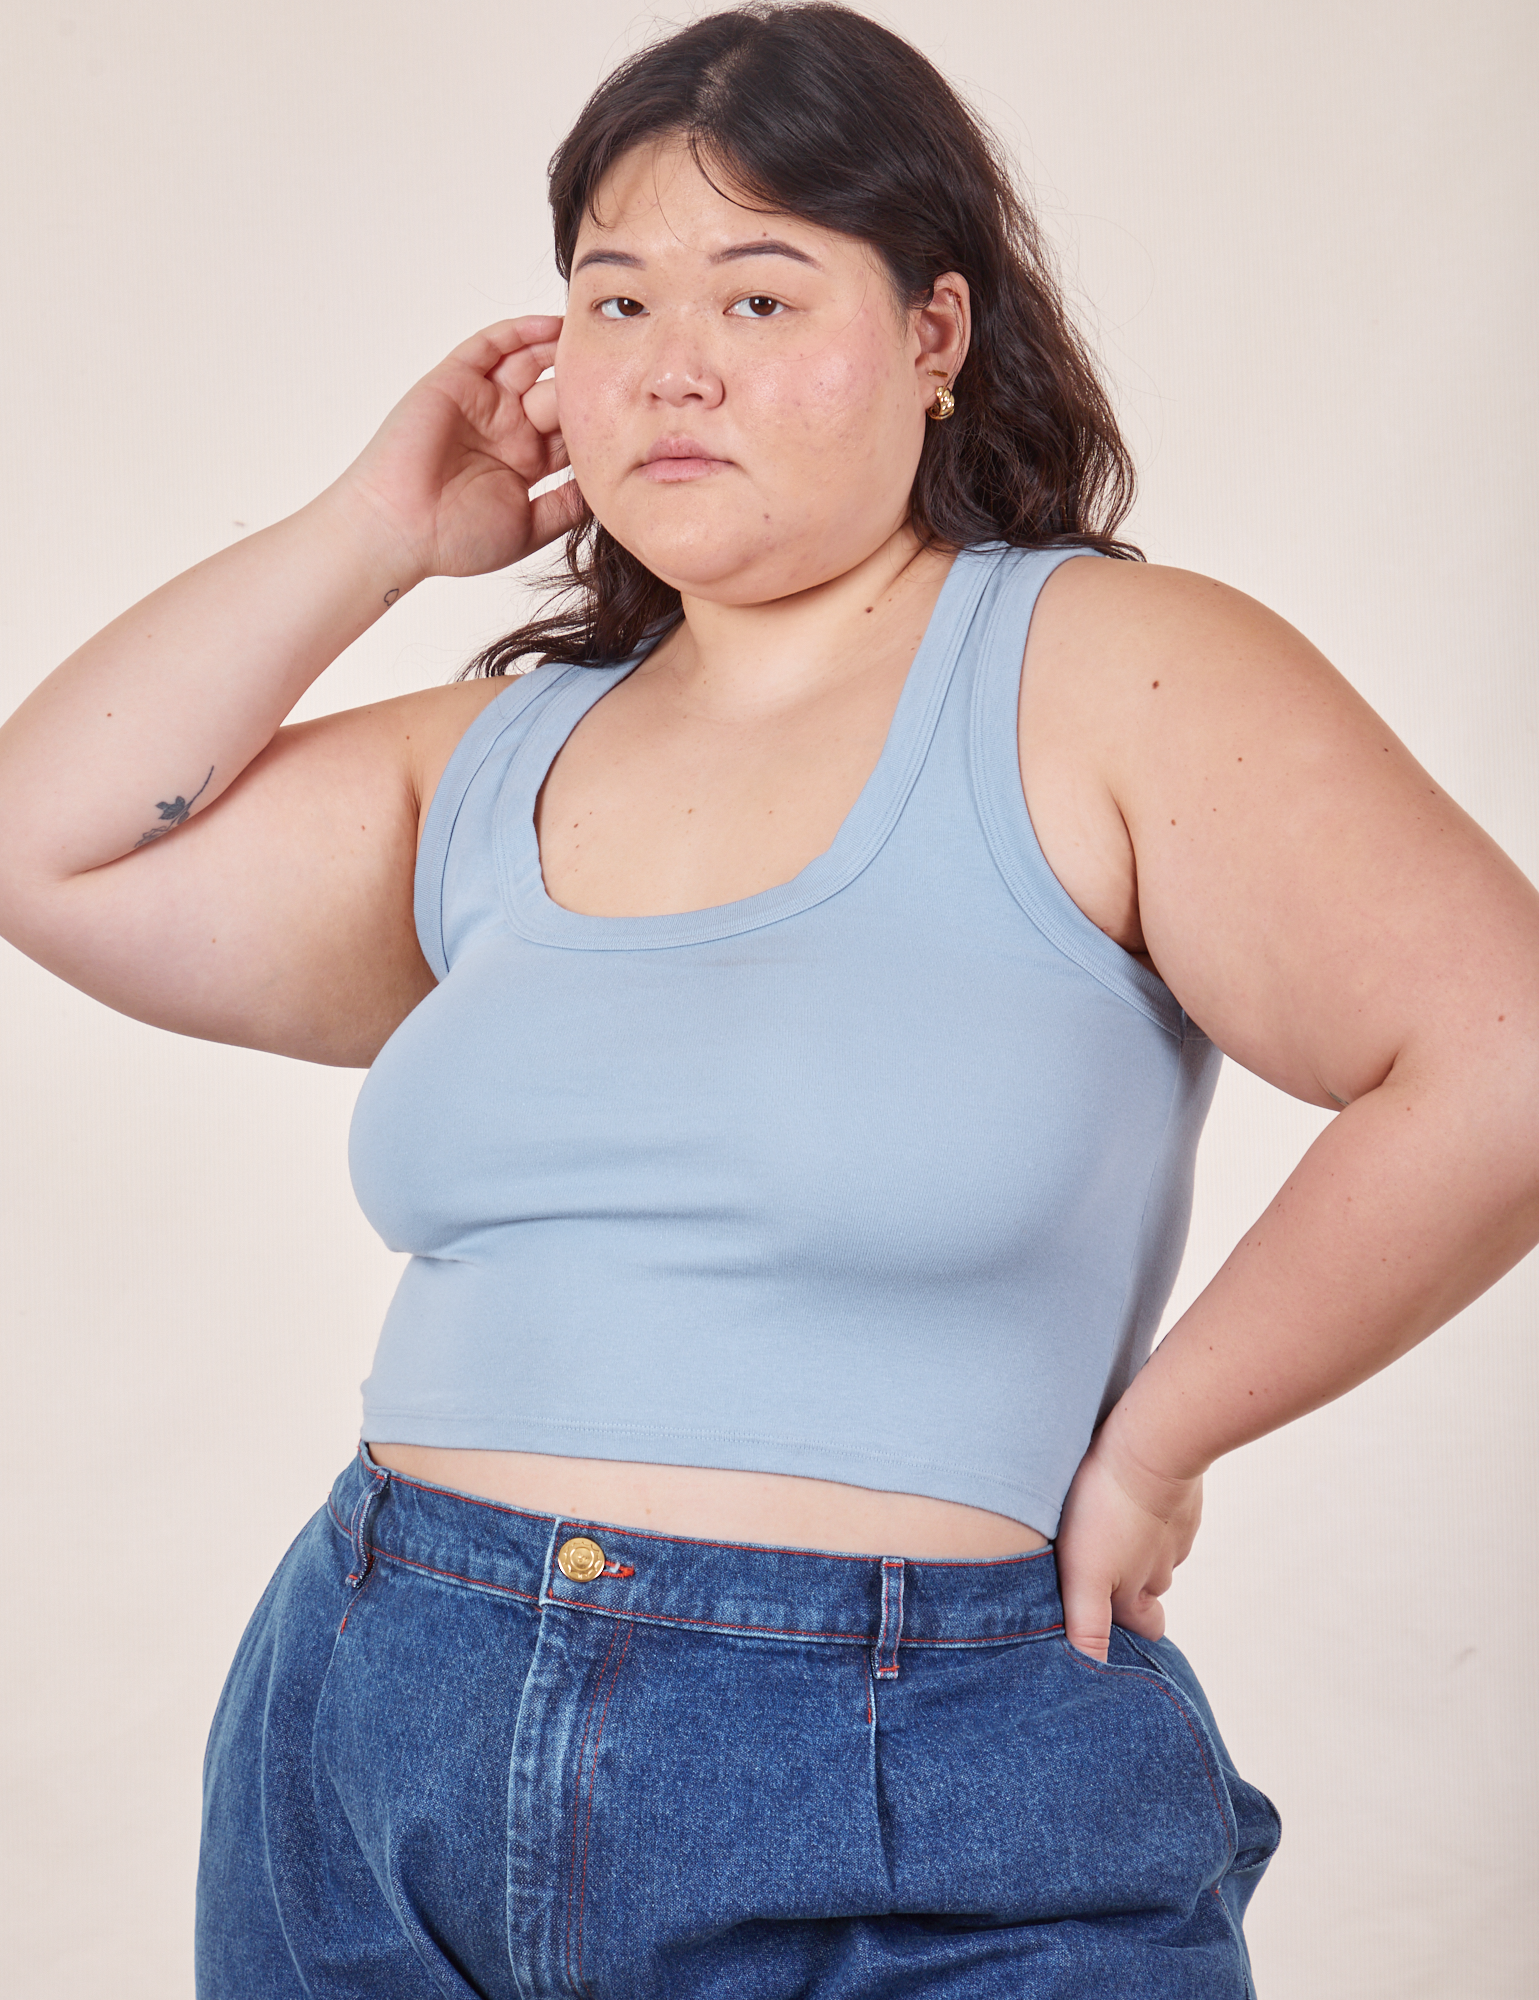 Ashley is 5'7" and wearing L Cropped Tank Top in Periwinkle